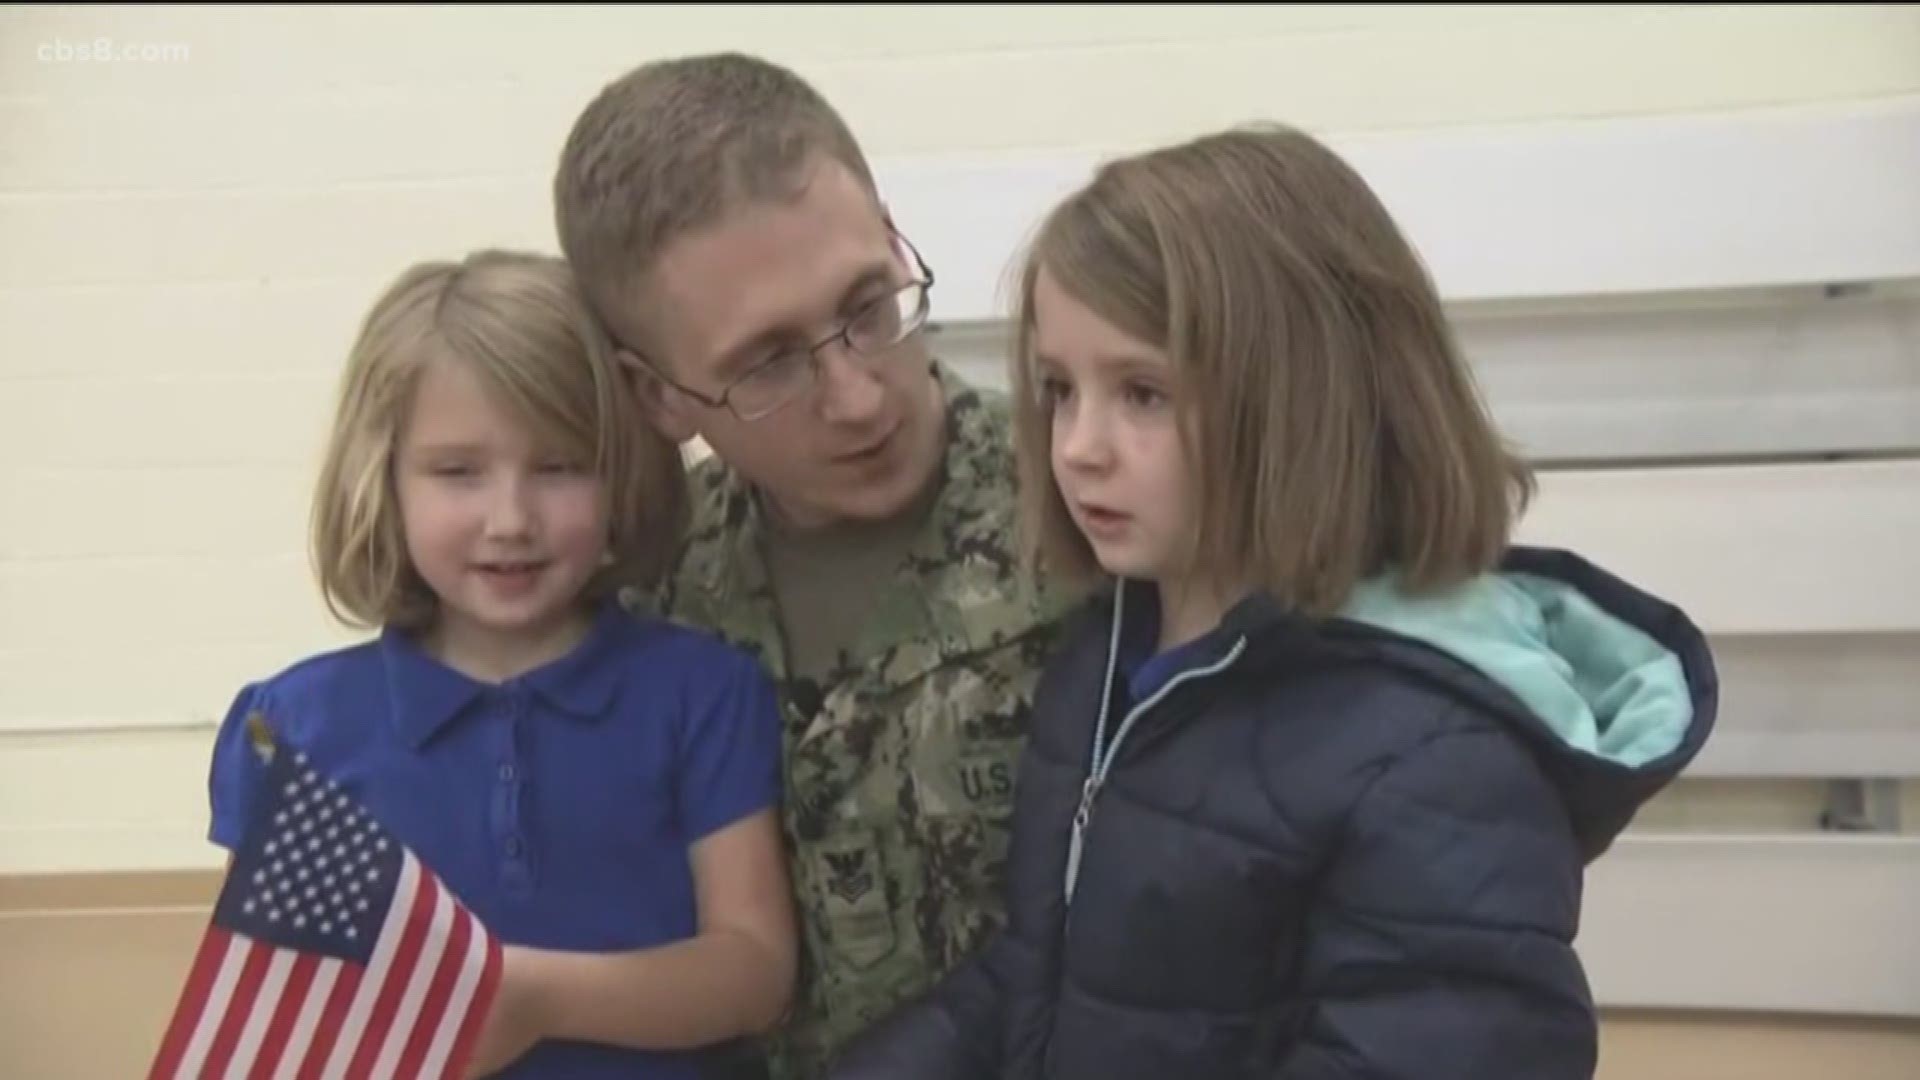 A U.S. Navy sailor returned from deployment on Tuesday and surprised his two daughters at their school.